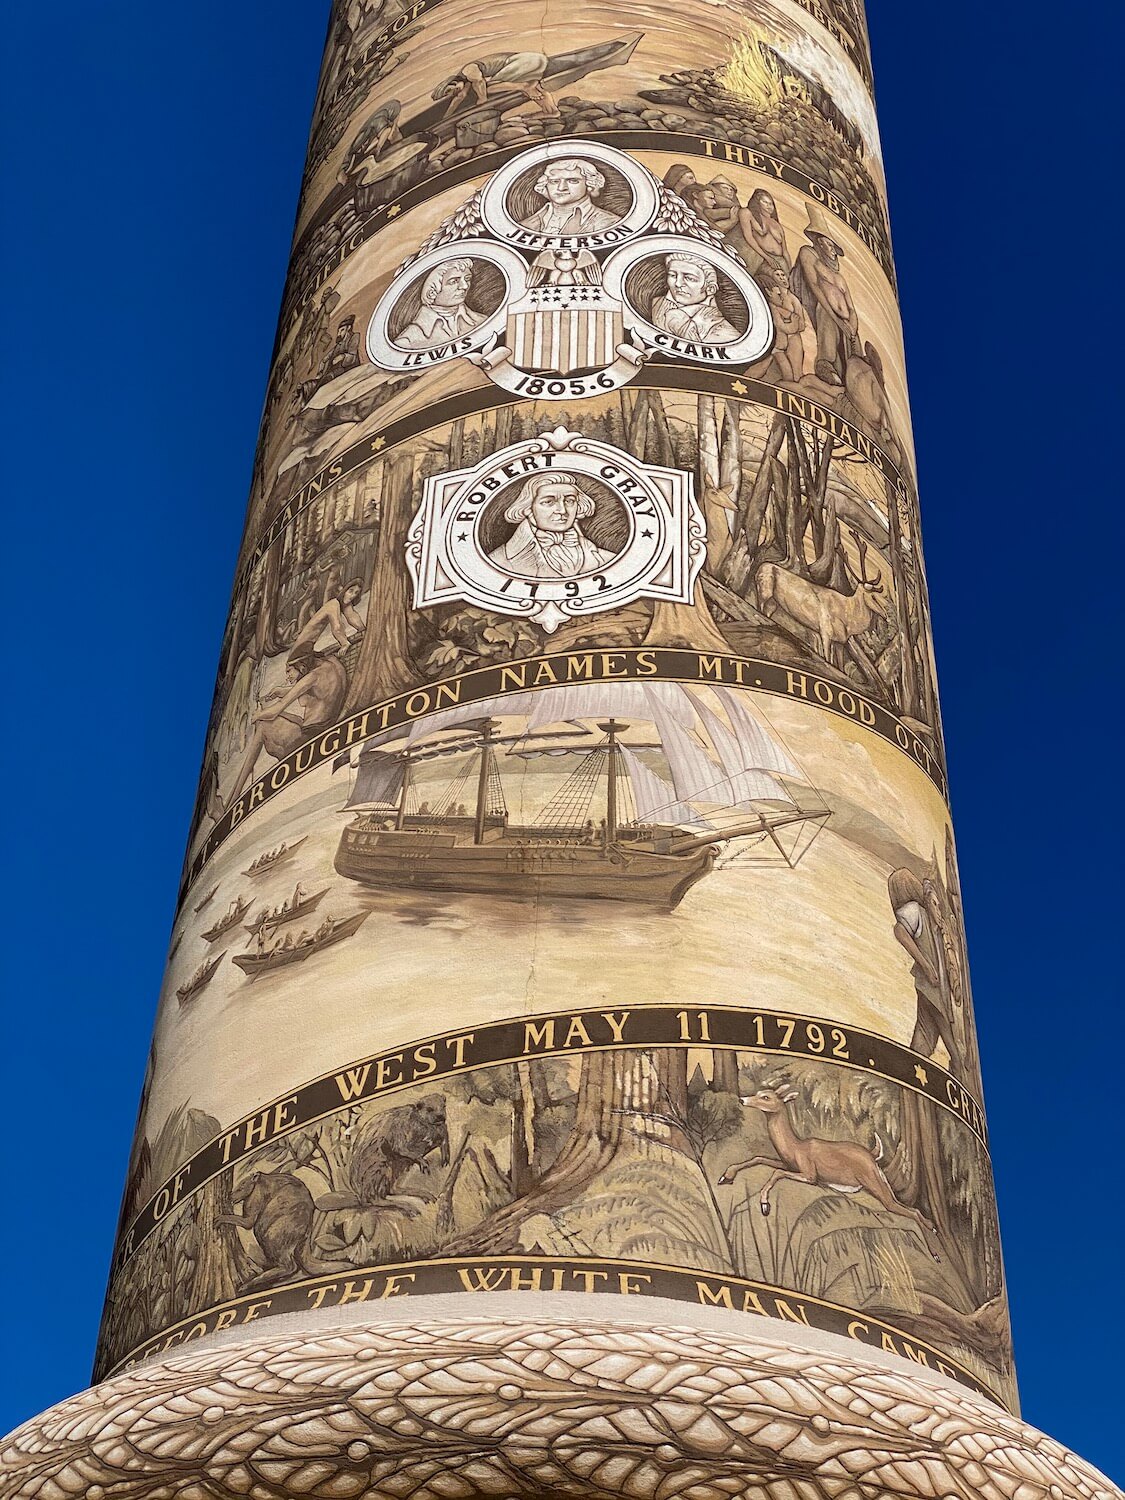 A section of the Astoria Column has intricate information painted onto the stucco surface.  The sky is a vibrant blue in the background.